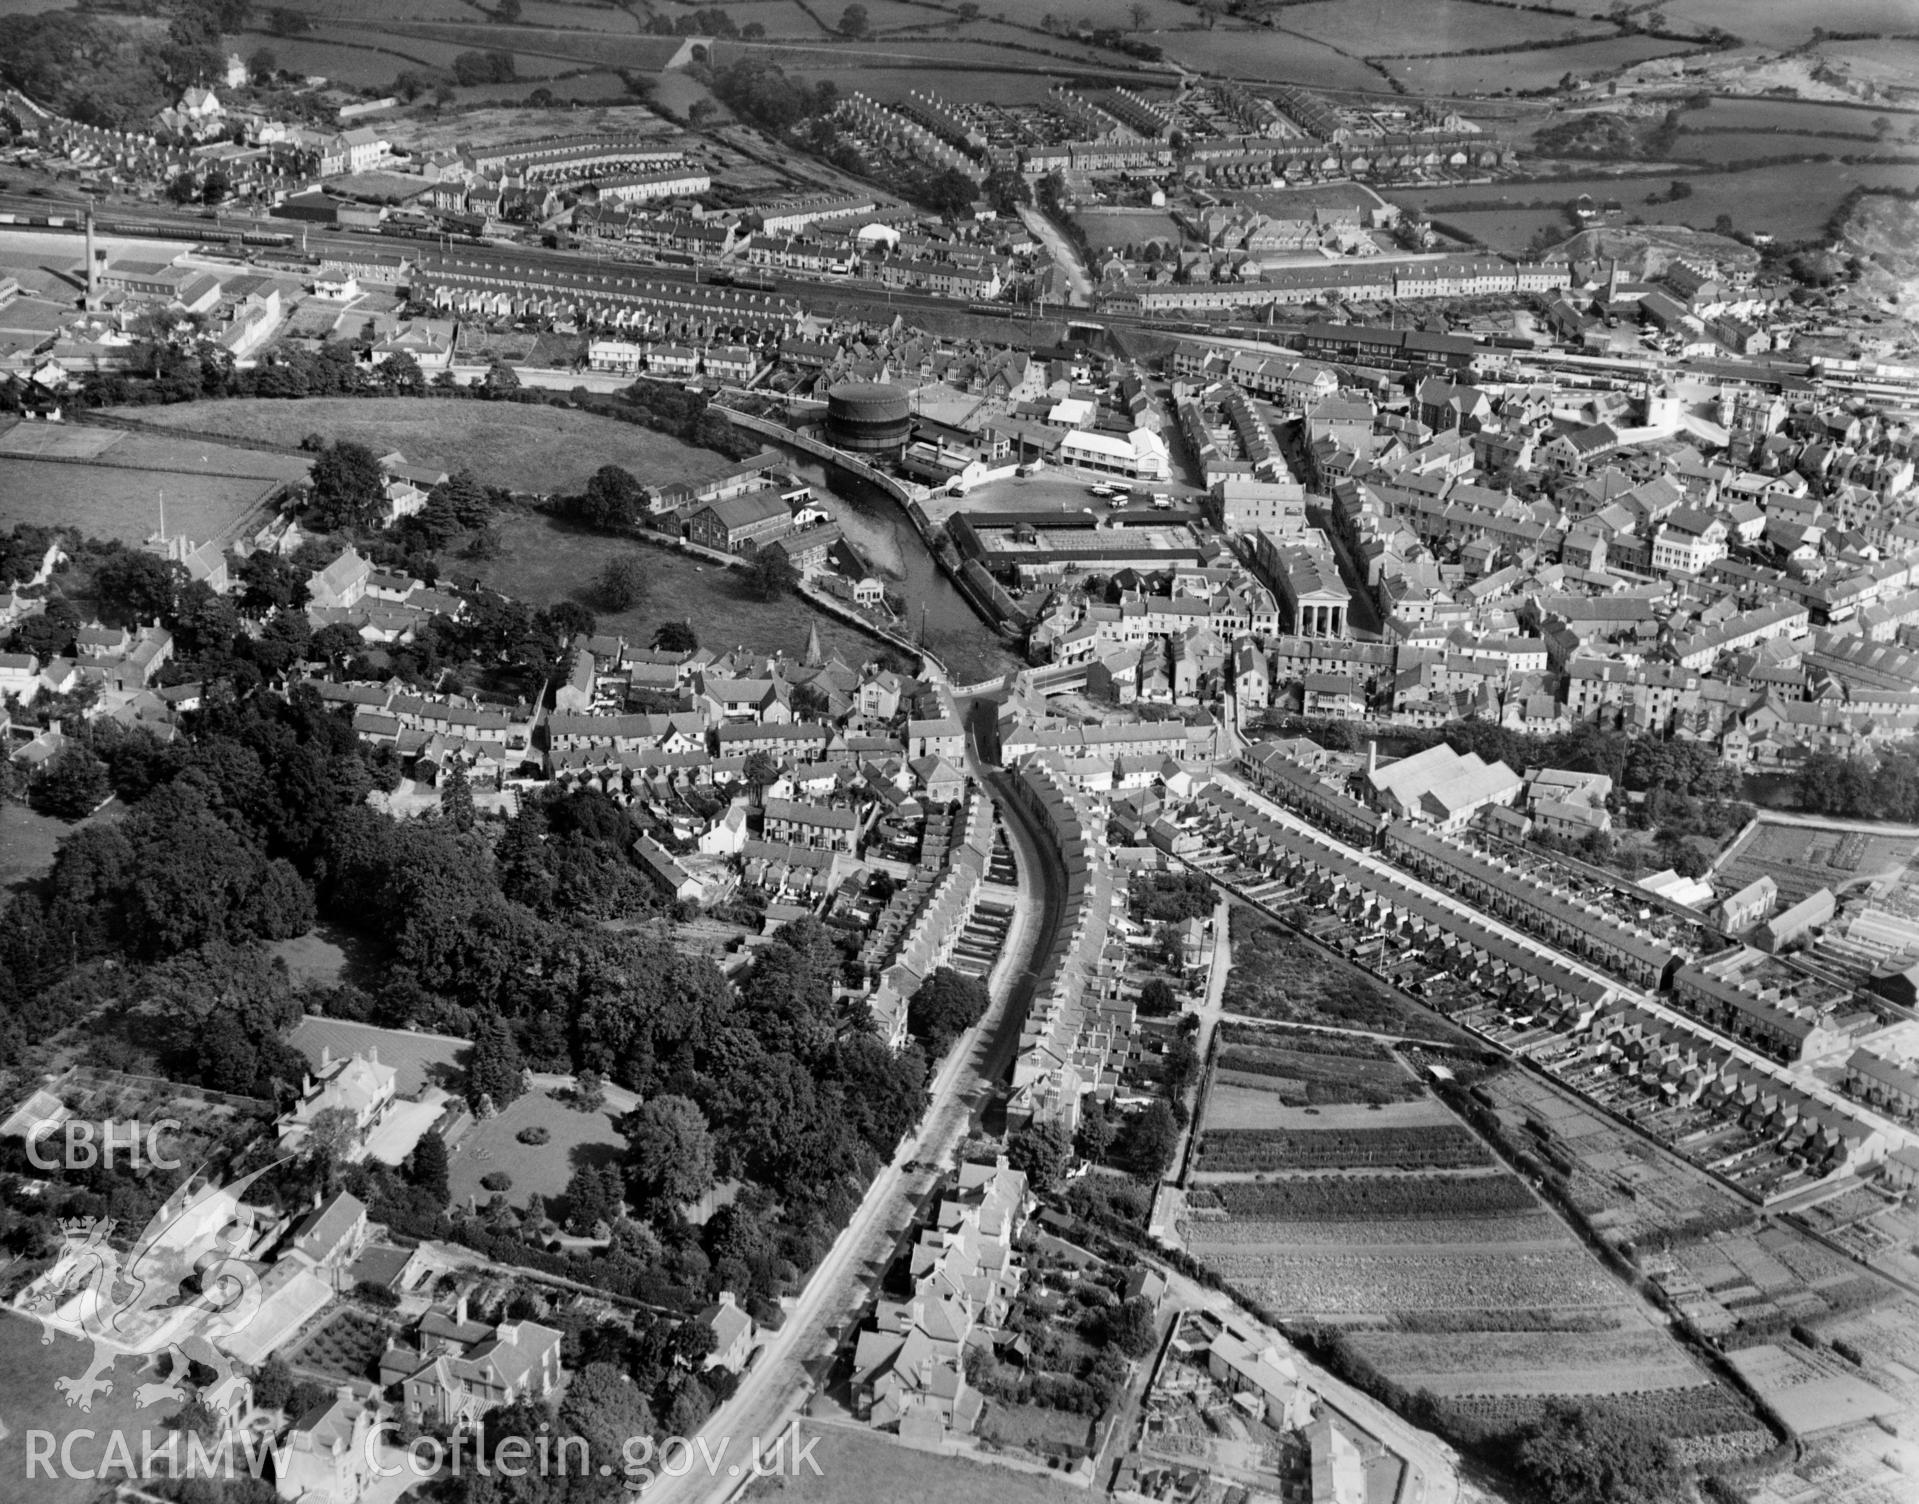 General view of Bridgend, oblique aerial view. 5?x4? black and white glass plate negative.